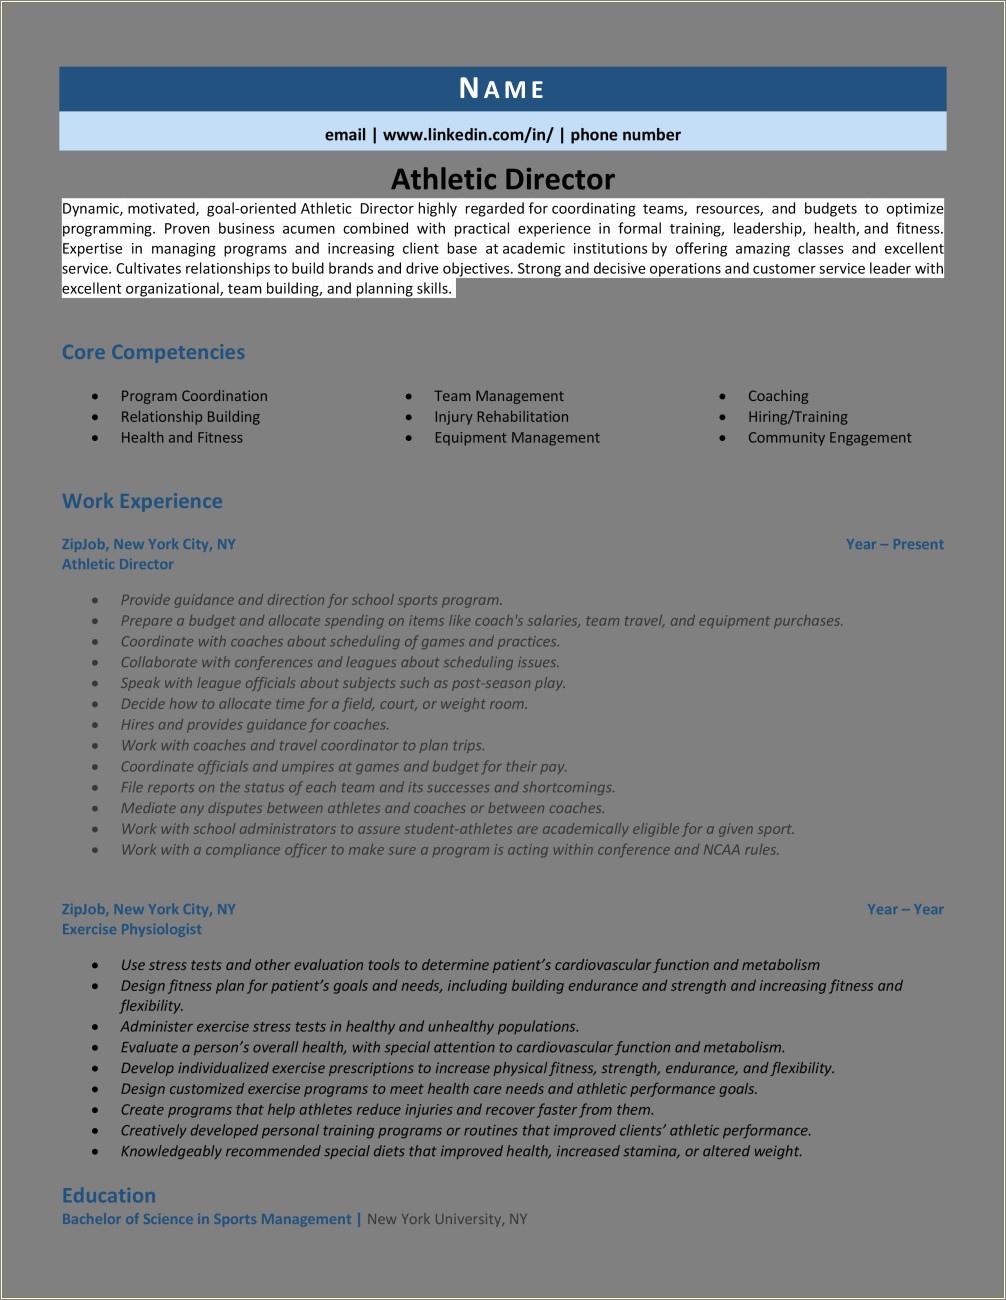 Sample Resume For Athletic Director Position